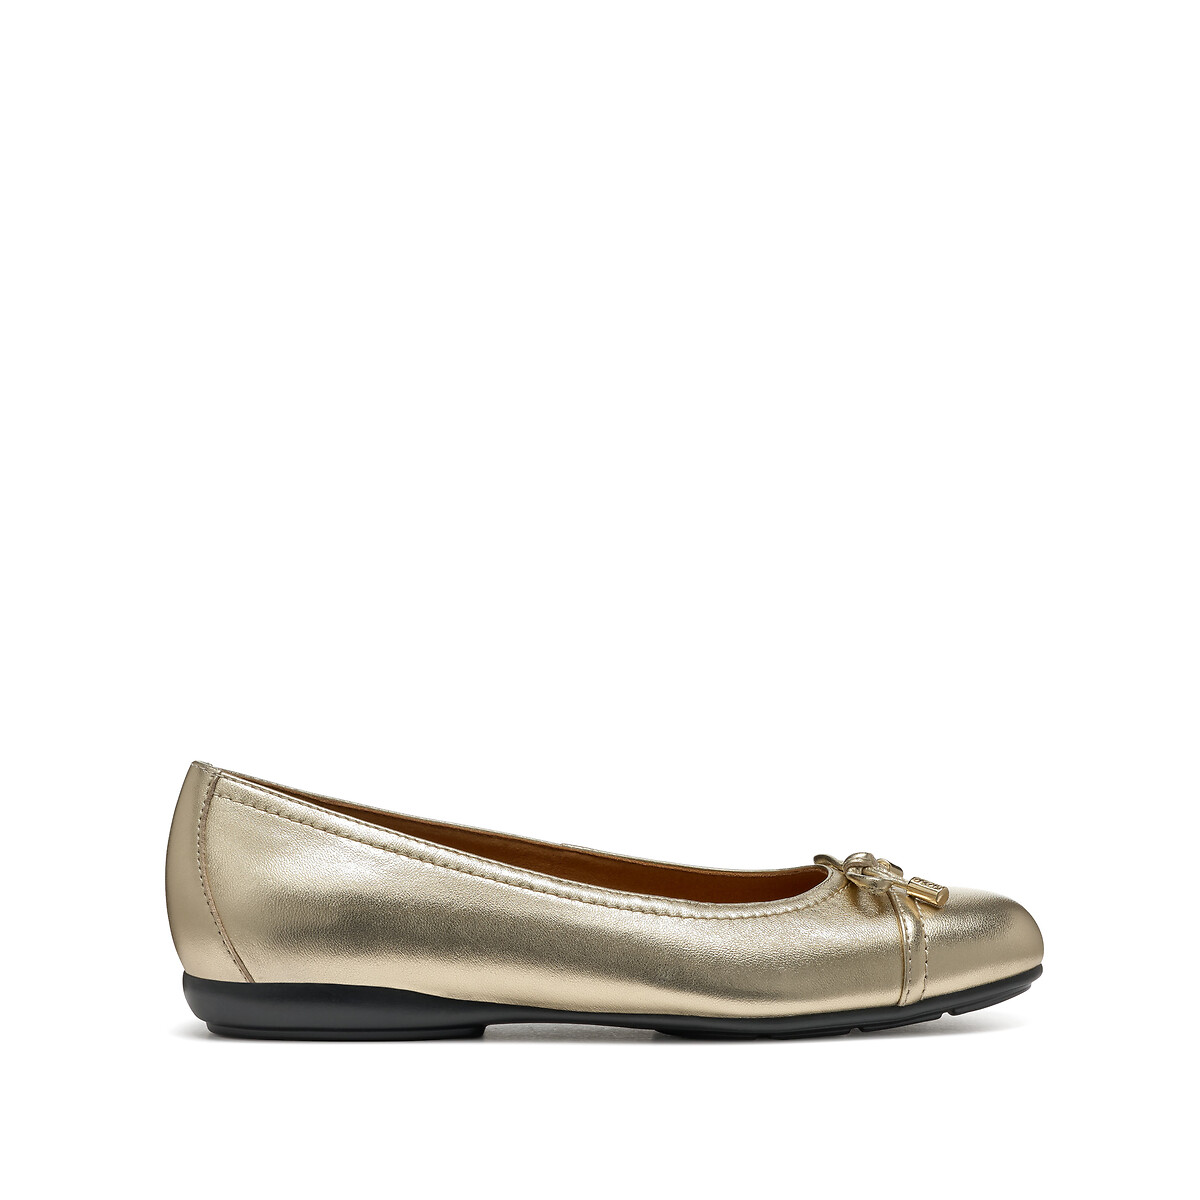 Image of Annytah Breathable Ballet Flats in Metallic Leather